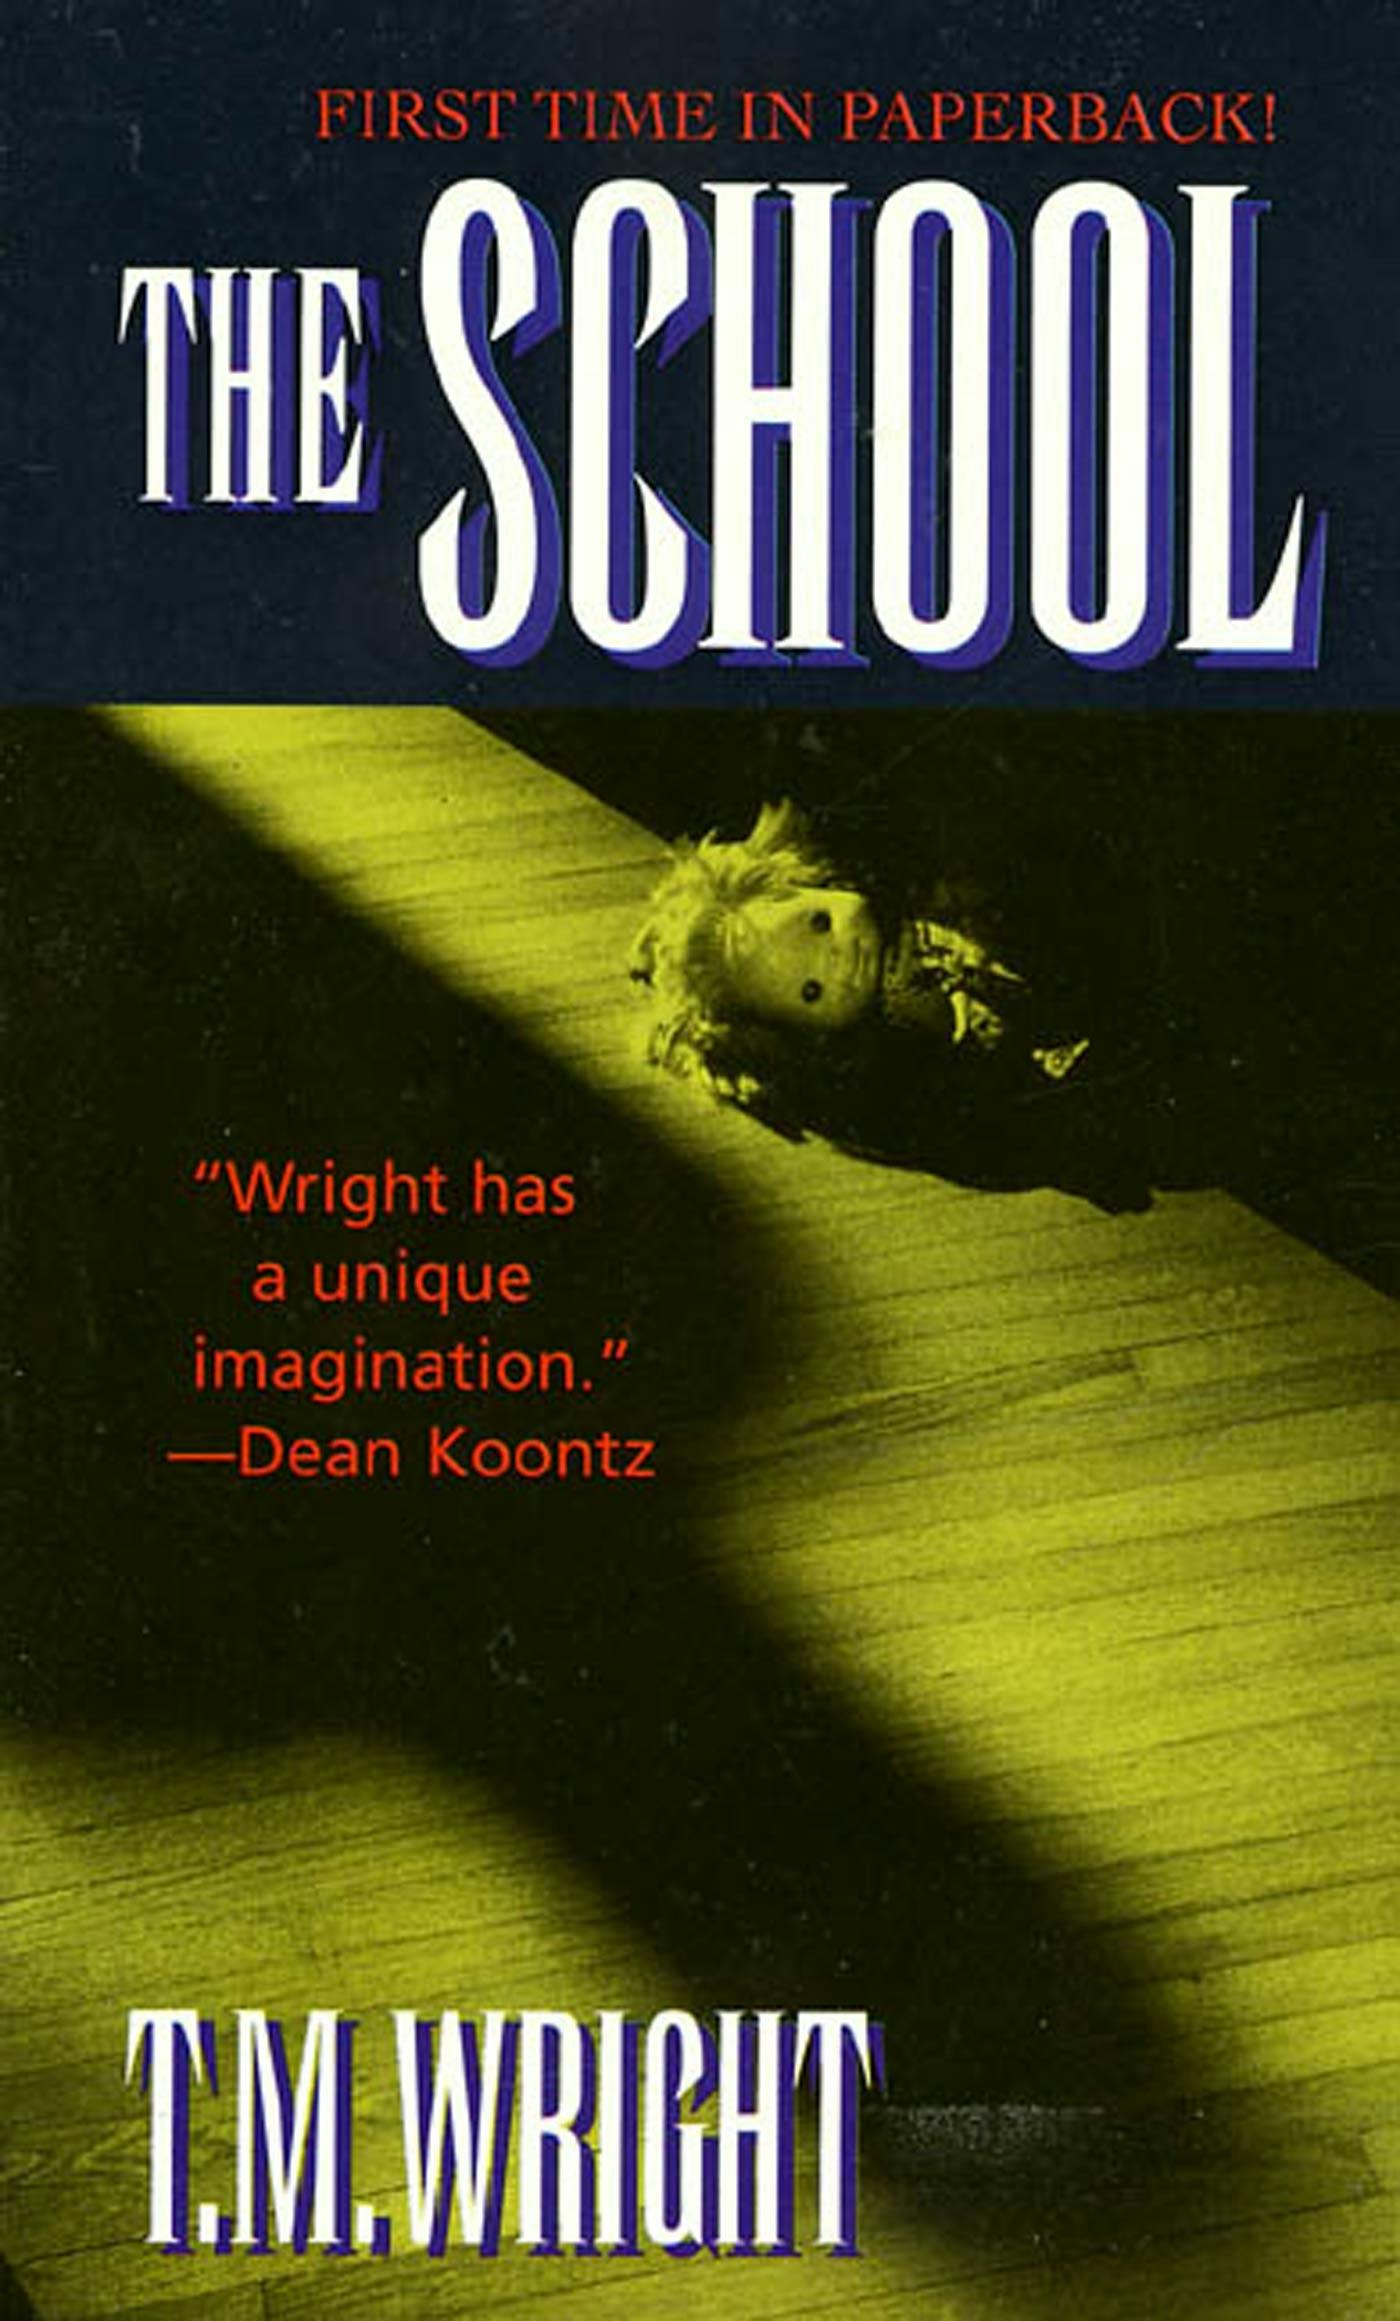 Cover for the book titled as: The School